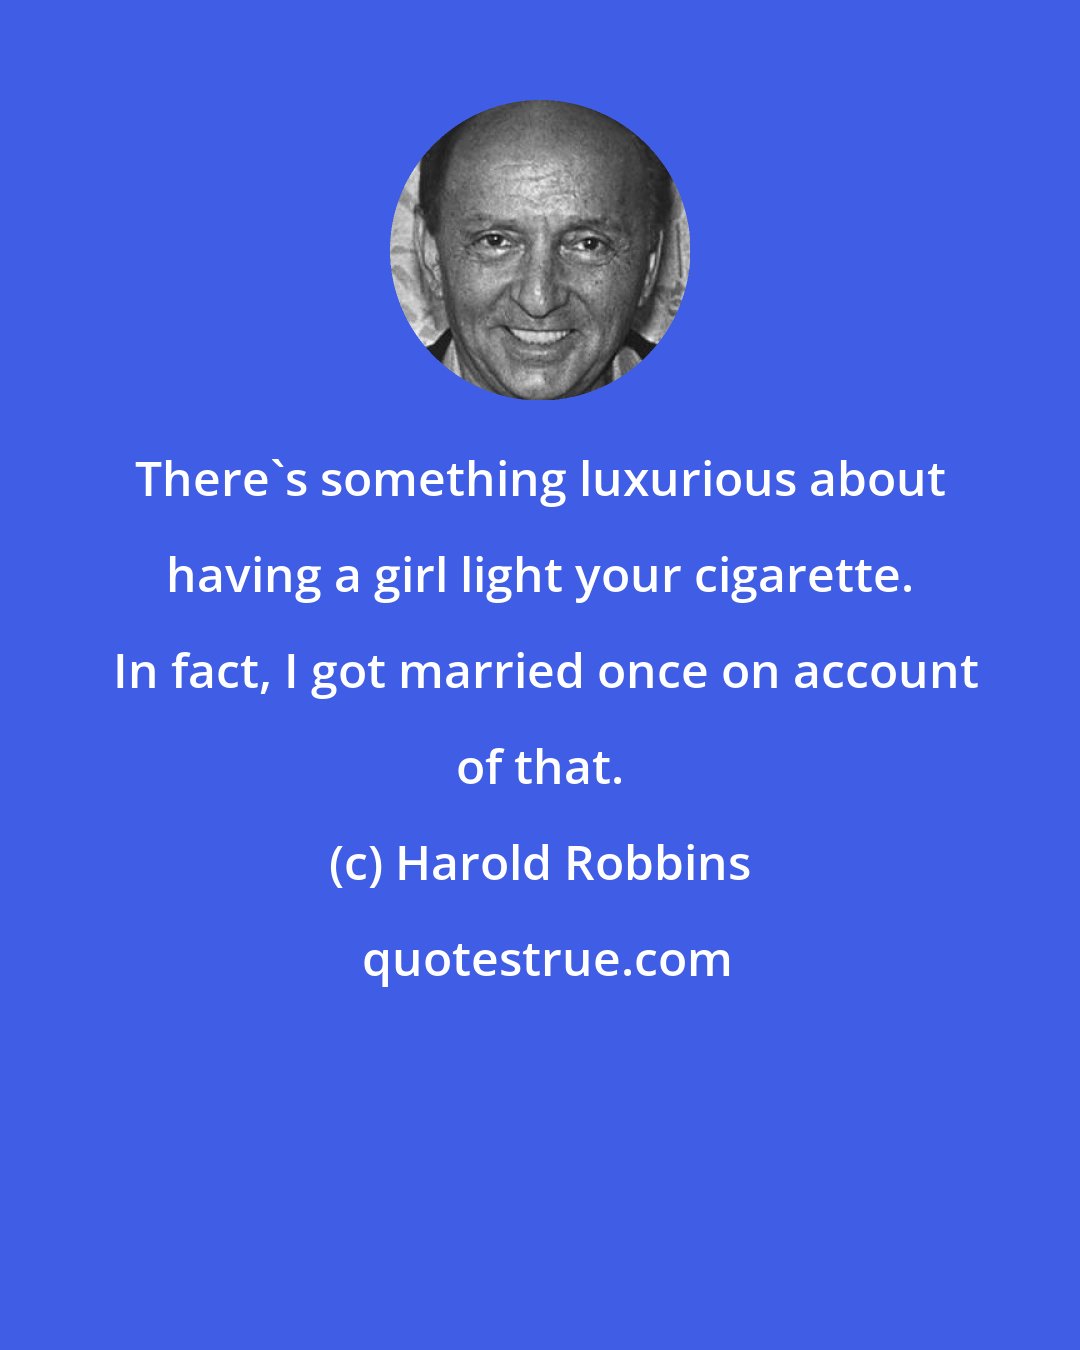 Harold Robbins: There's something luxurious about having a girl light your cigarette.  In fact, I got married once on account of that.